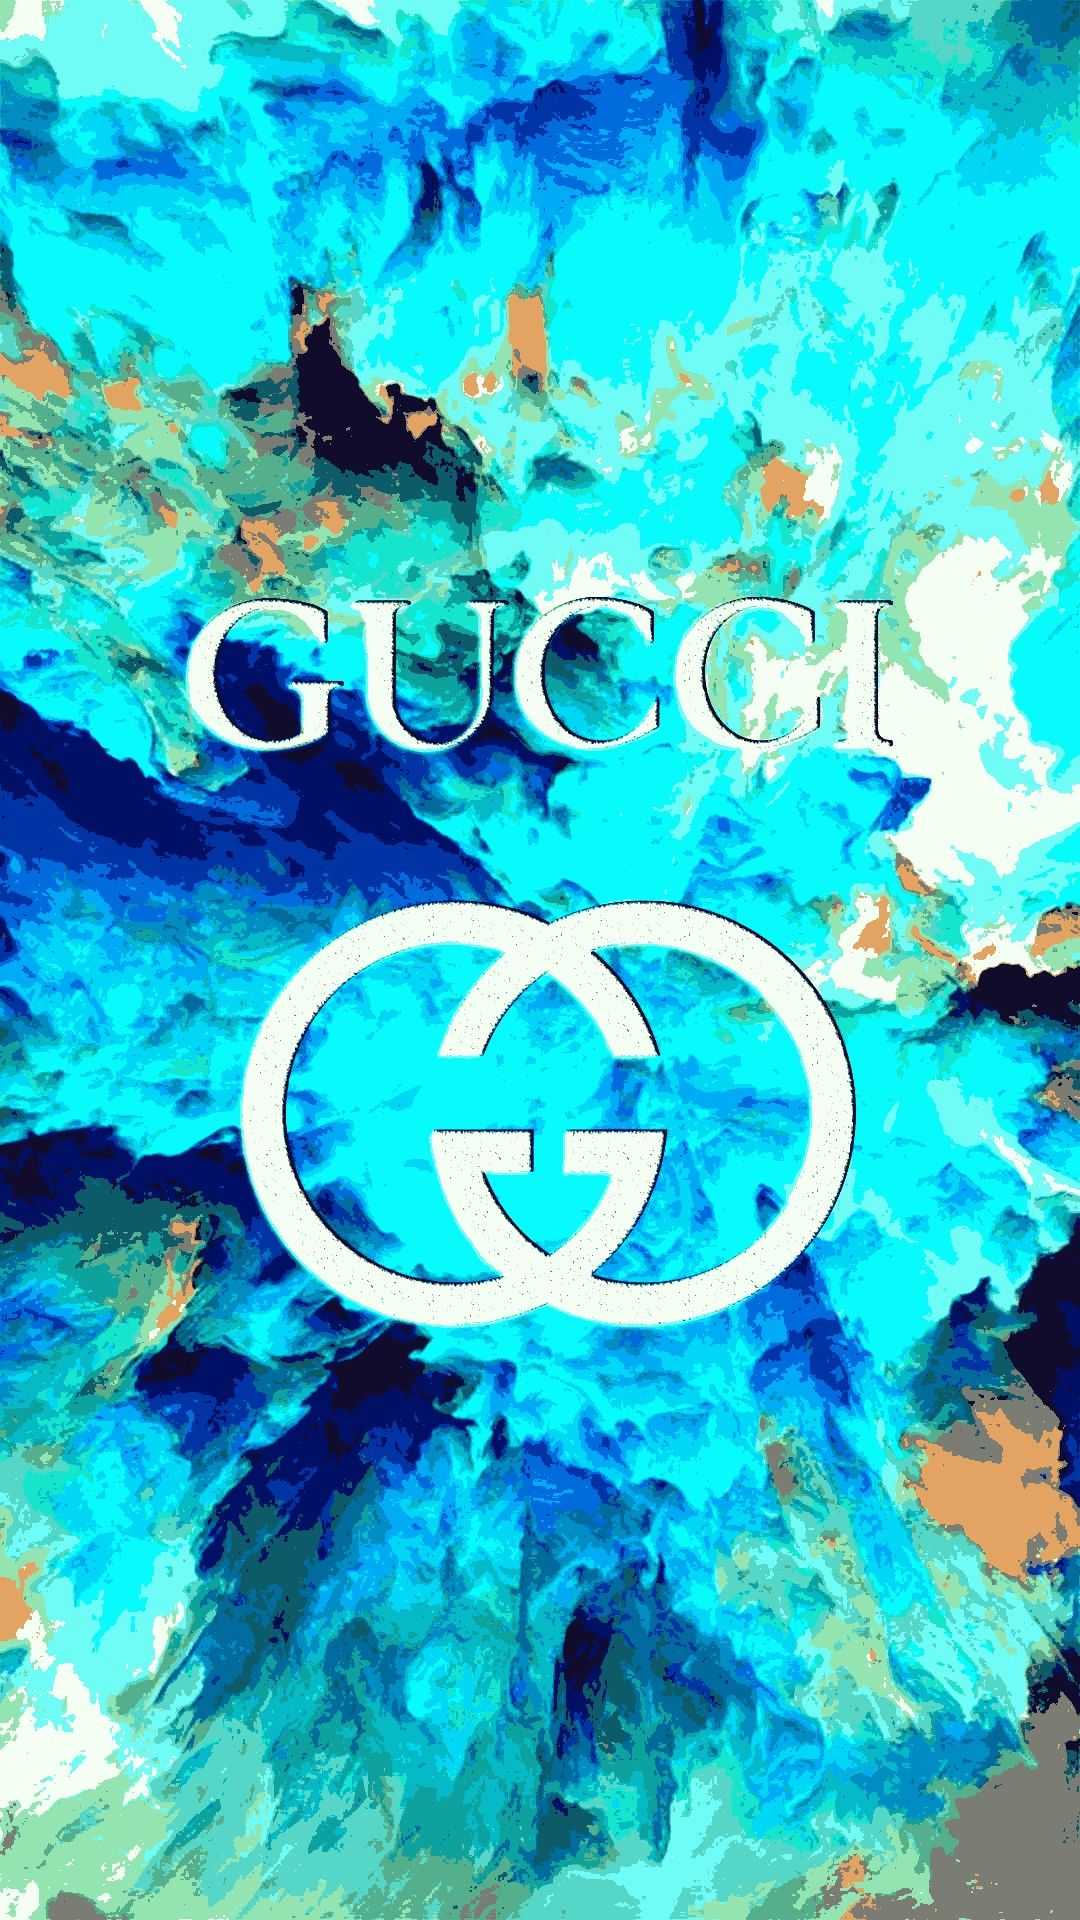 Blue Gucci Wallpaper, Here you can find the best gucci logo wallpaper uploaded